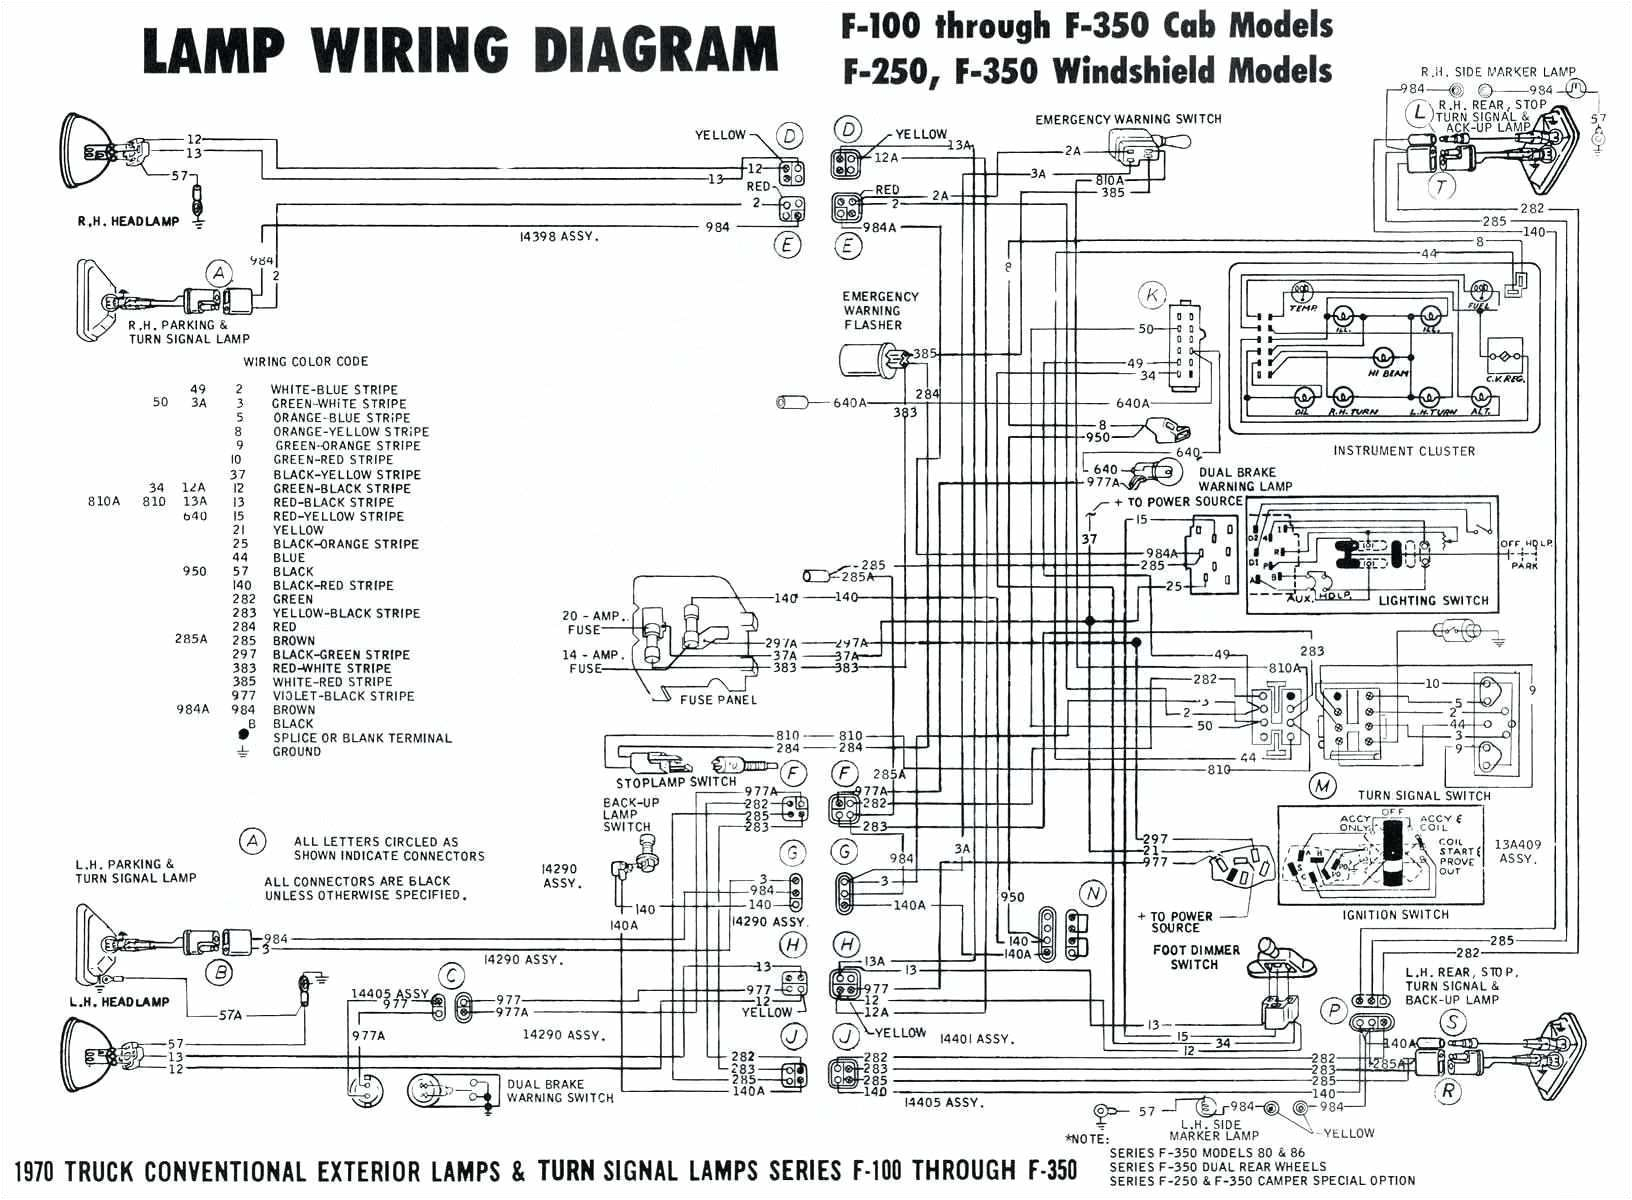 2003 expedition keyless entry wiring diagram awesome 2001 expedition fuel gauge wiring diagram of 2003 expedition keyless entry wiring diagram jpg